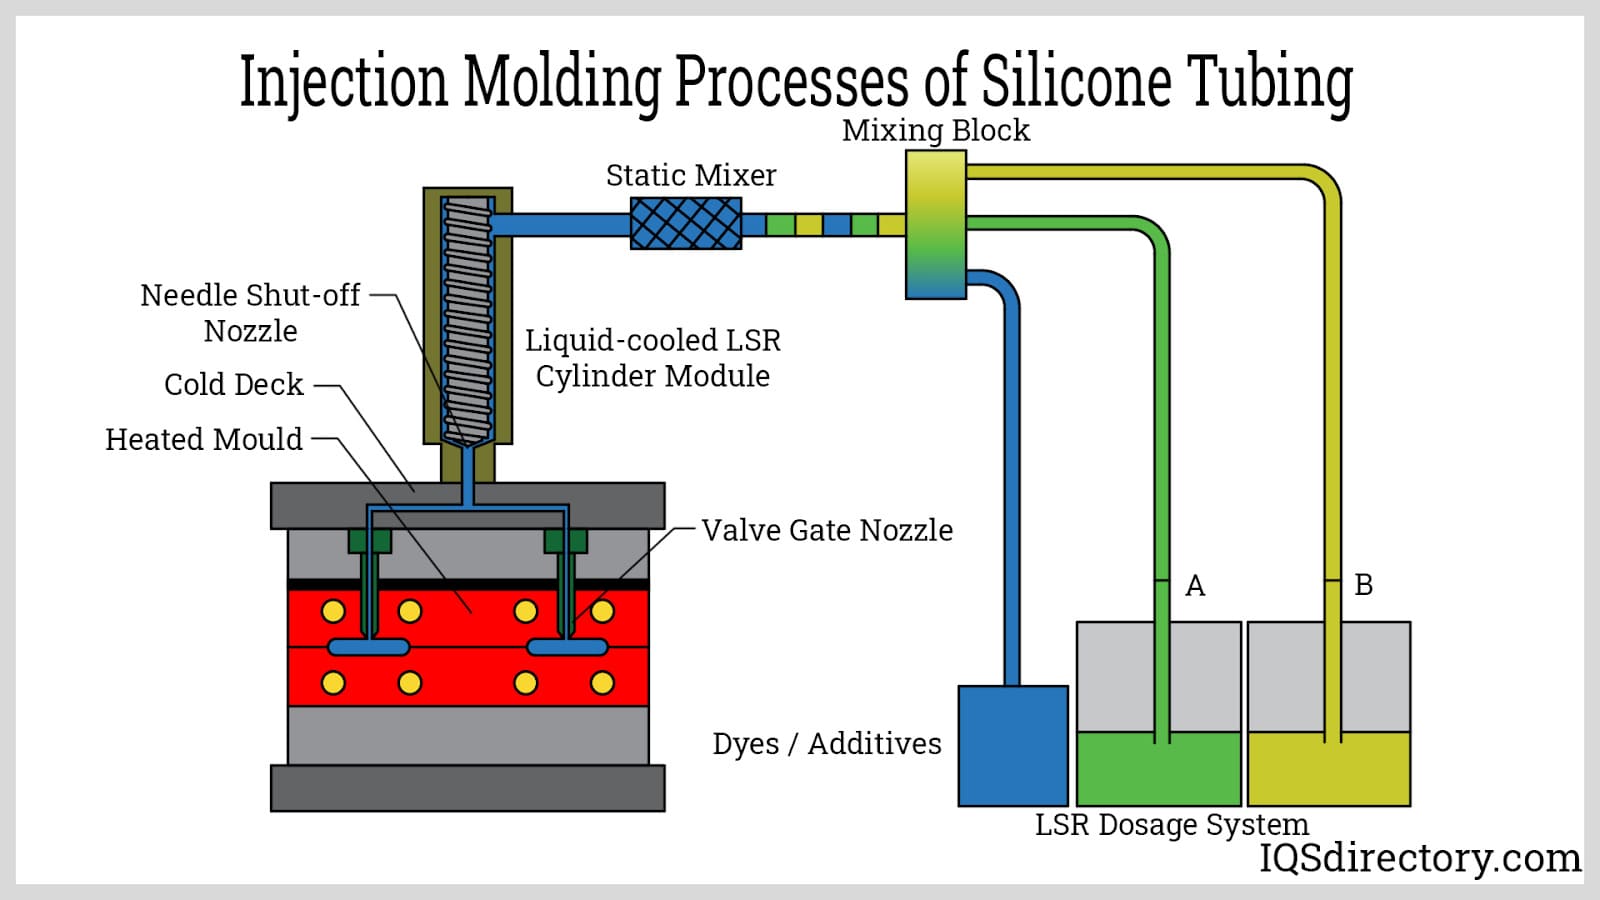 Injection Molding Processes of Silicone Tubing